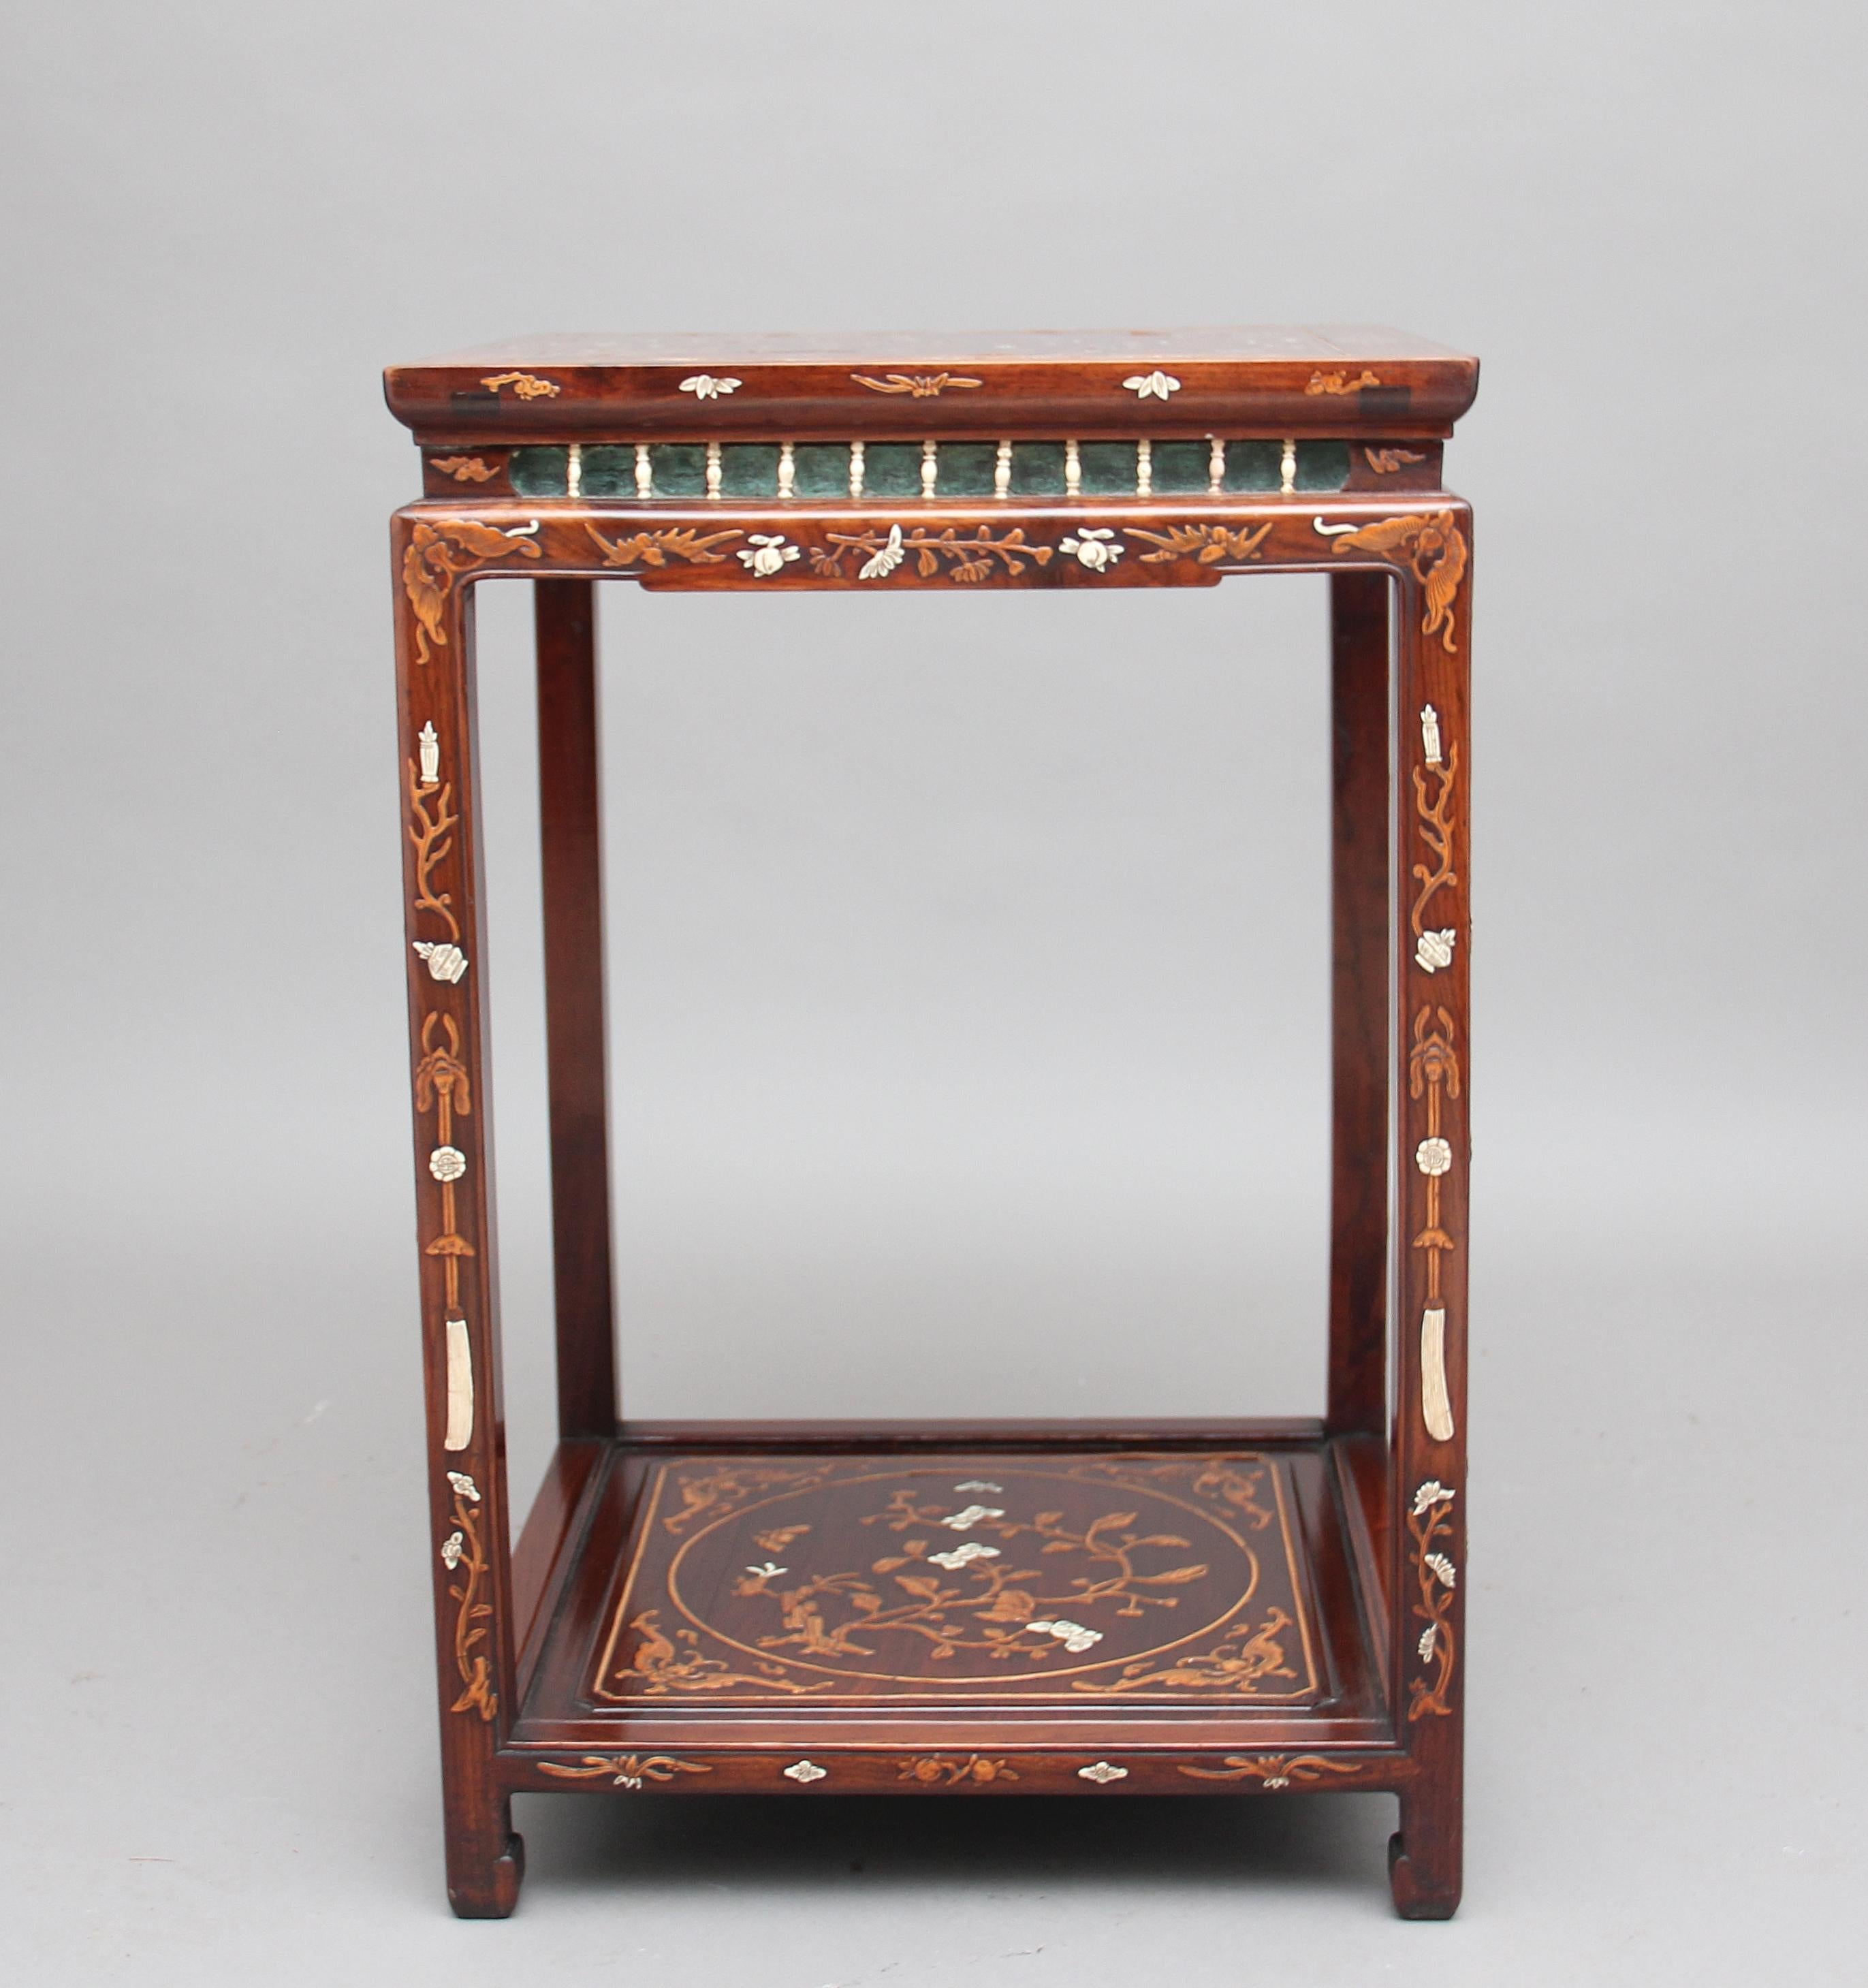 A decorative 19th century Chinese rosewood two-tier occasional table profusely inlaid all over with bone and wood inlay, the square top heavily inlaid with various floral decoration, symbols and creatures, the centre of the top depicting a Chinese